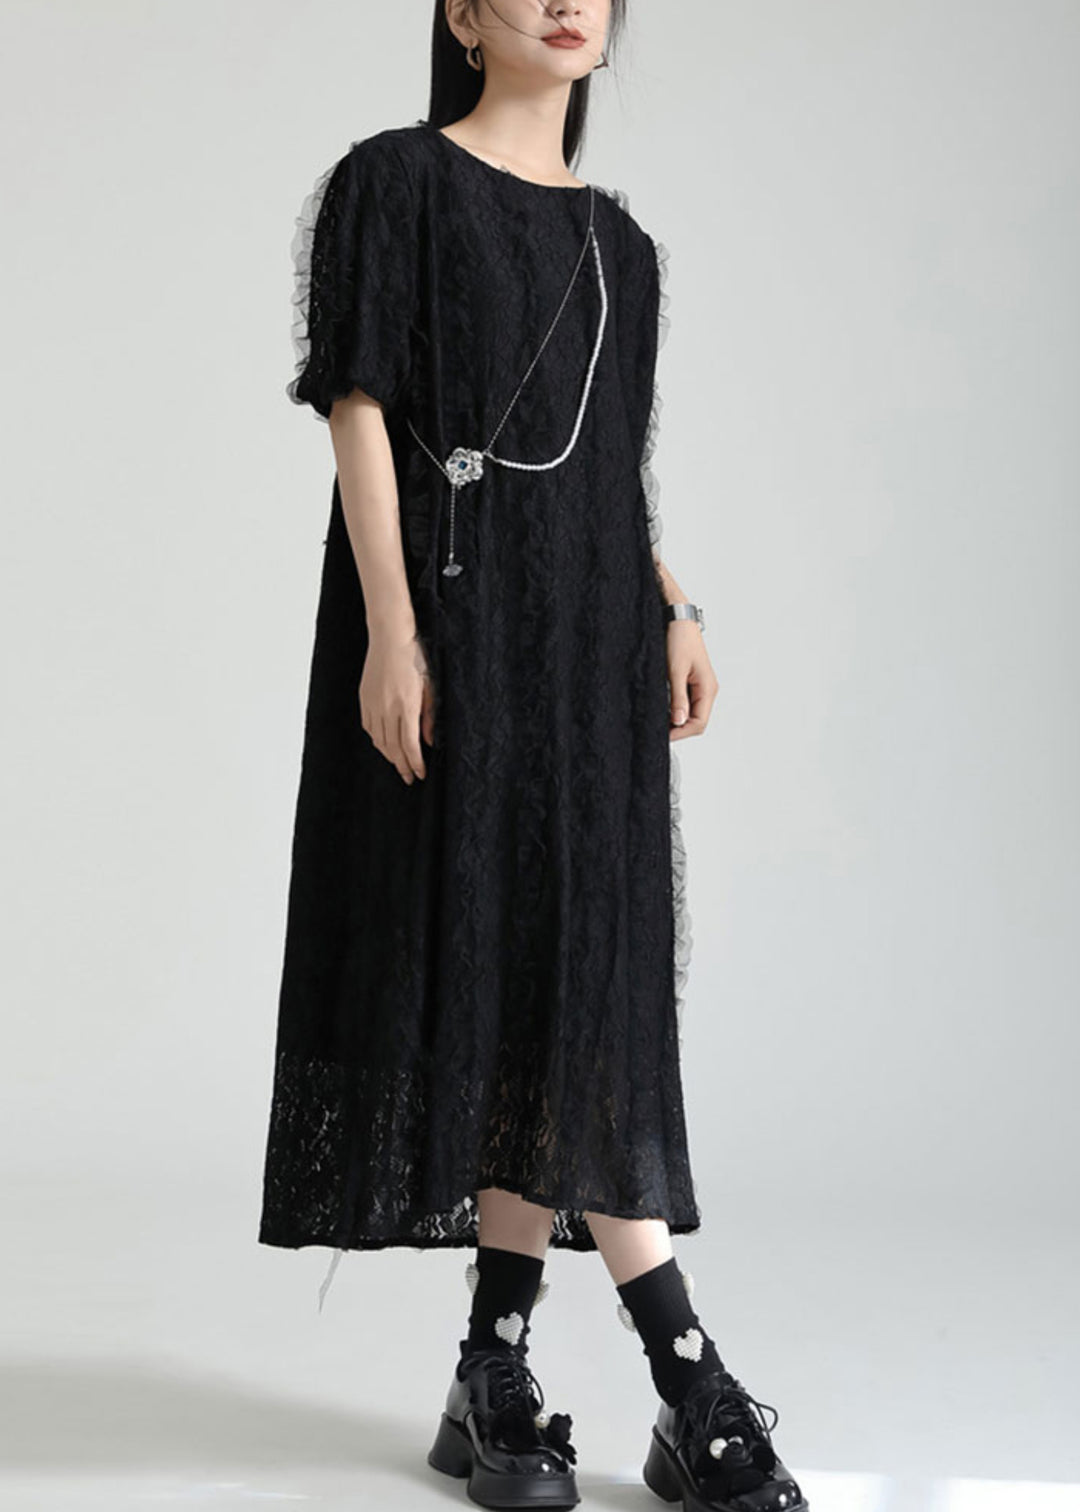 French Black O Neck Patchwork Lace Dresses Summer